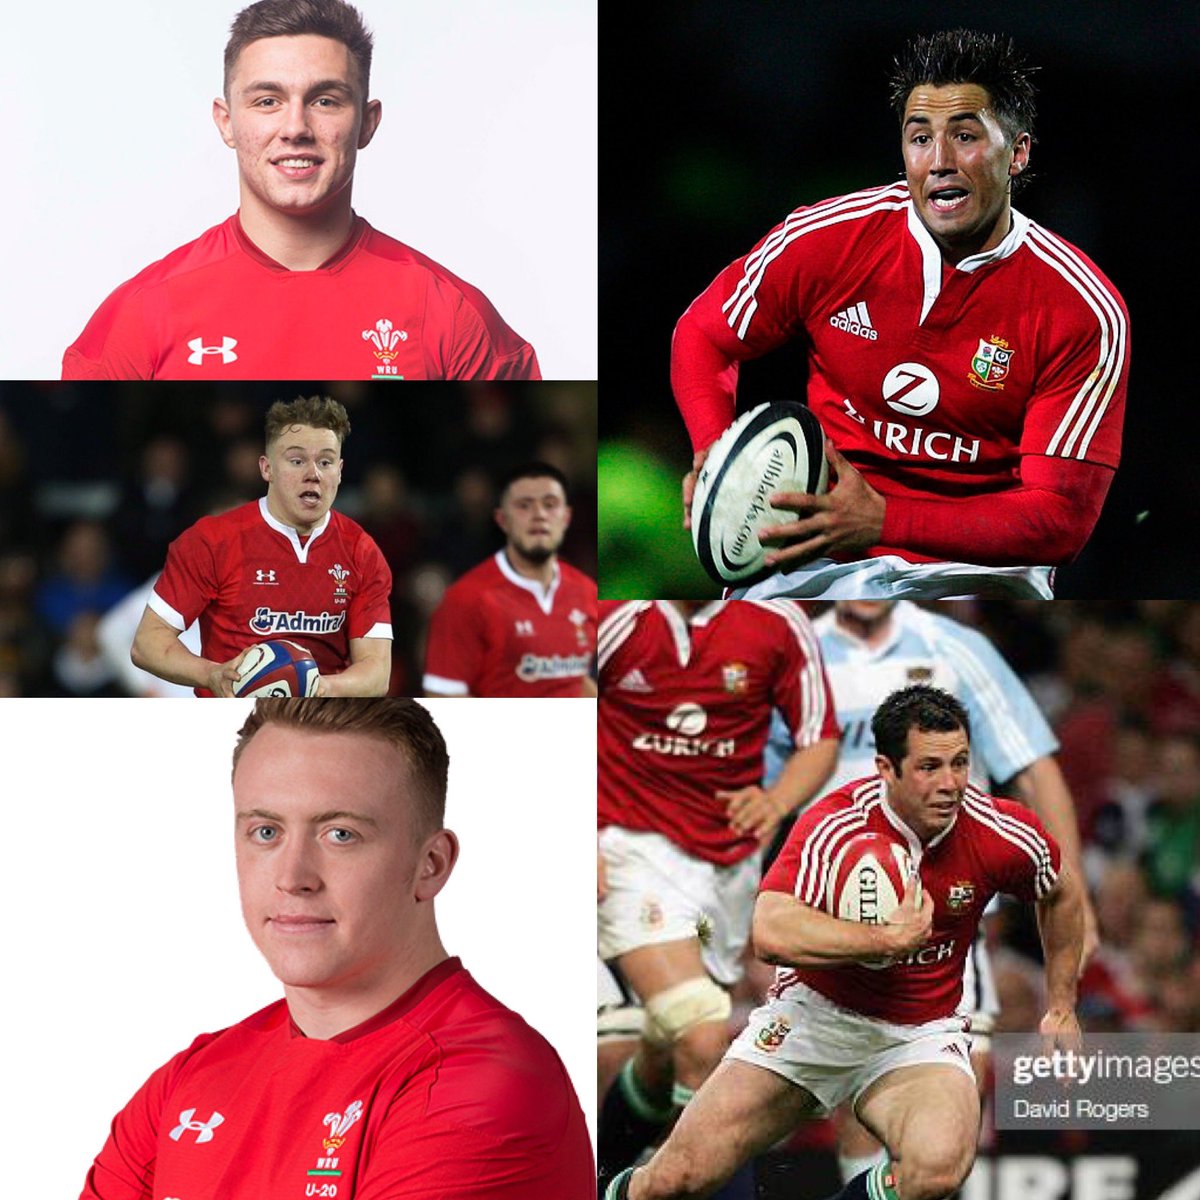 2 Ex Lions and 3 rising welsh stars help @pencoedrfc to complete a 48hr charity run in support of local ICU departments. @WalesRugby @WRUMediaOffice @lionsofficial @LeicesterTigers @scarlets_rugby @ospreys @bridgendravens @gavinhenson82 @garethcooper9 justgiving.com/crowdfunding/p…